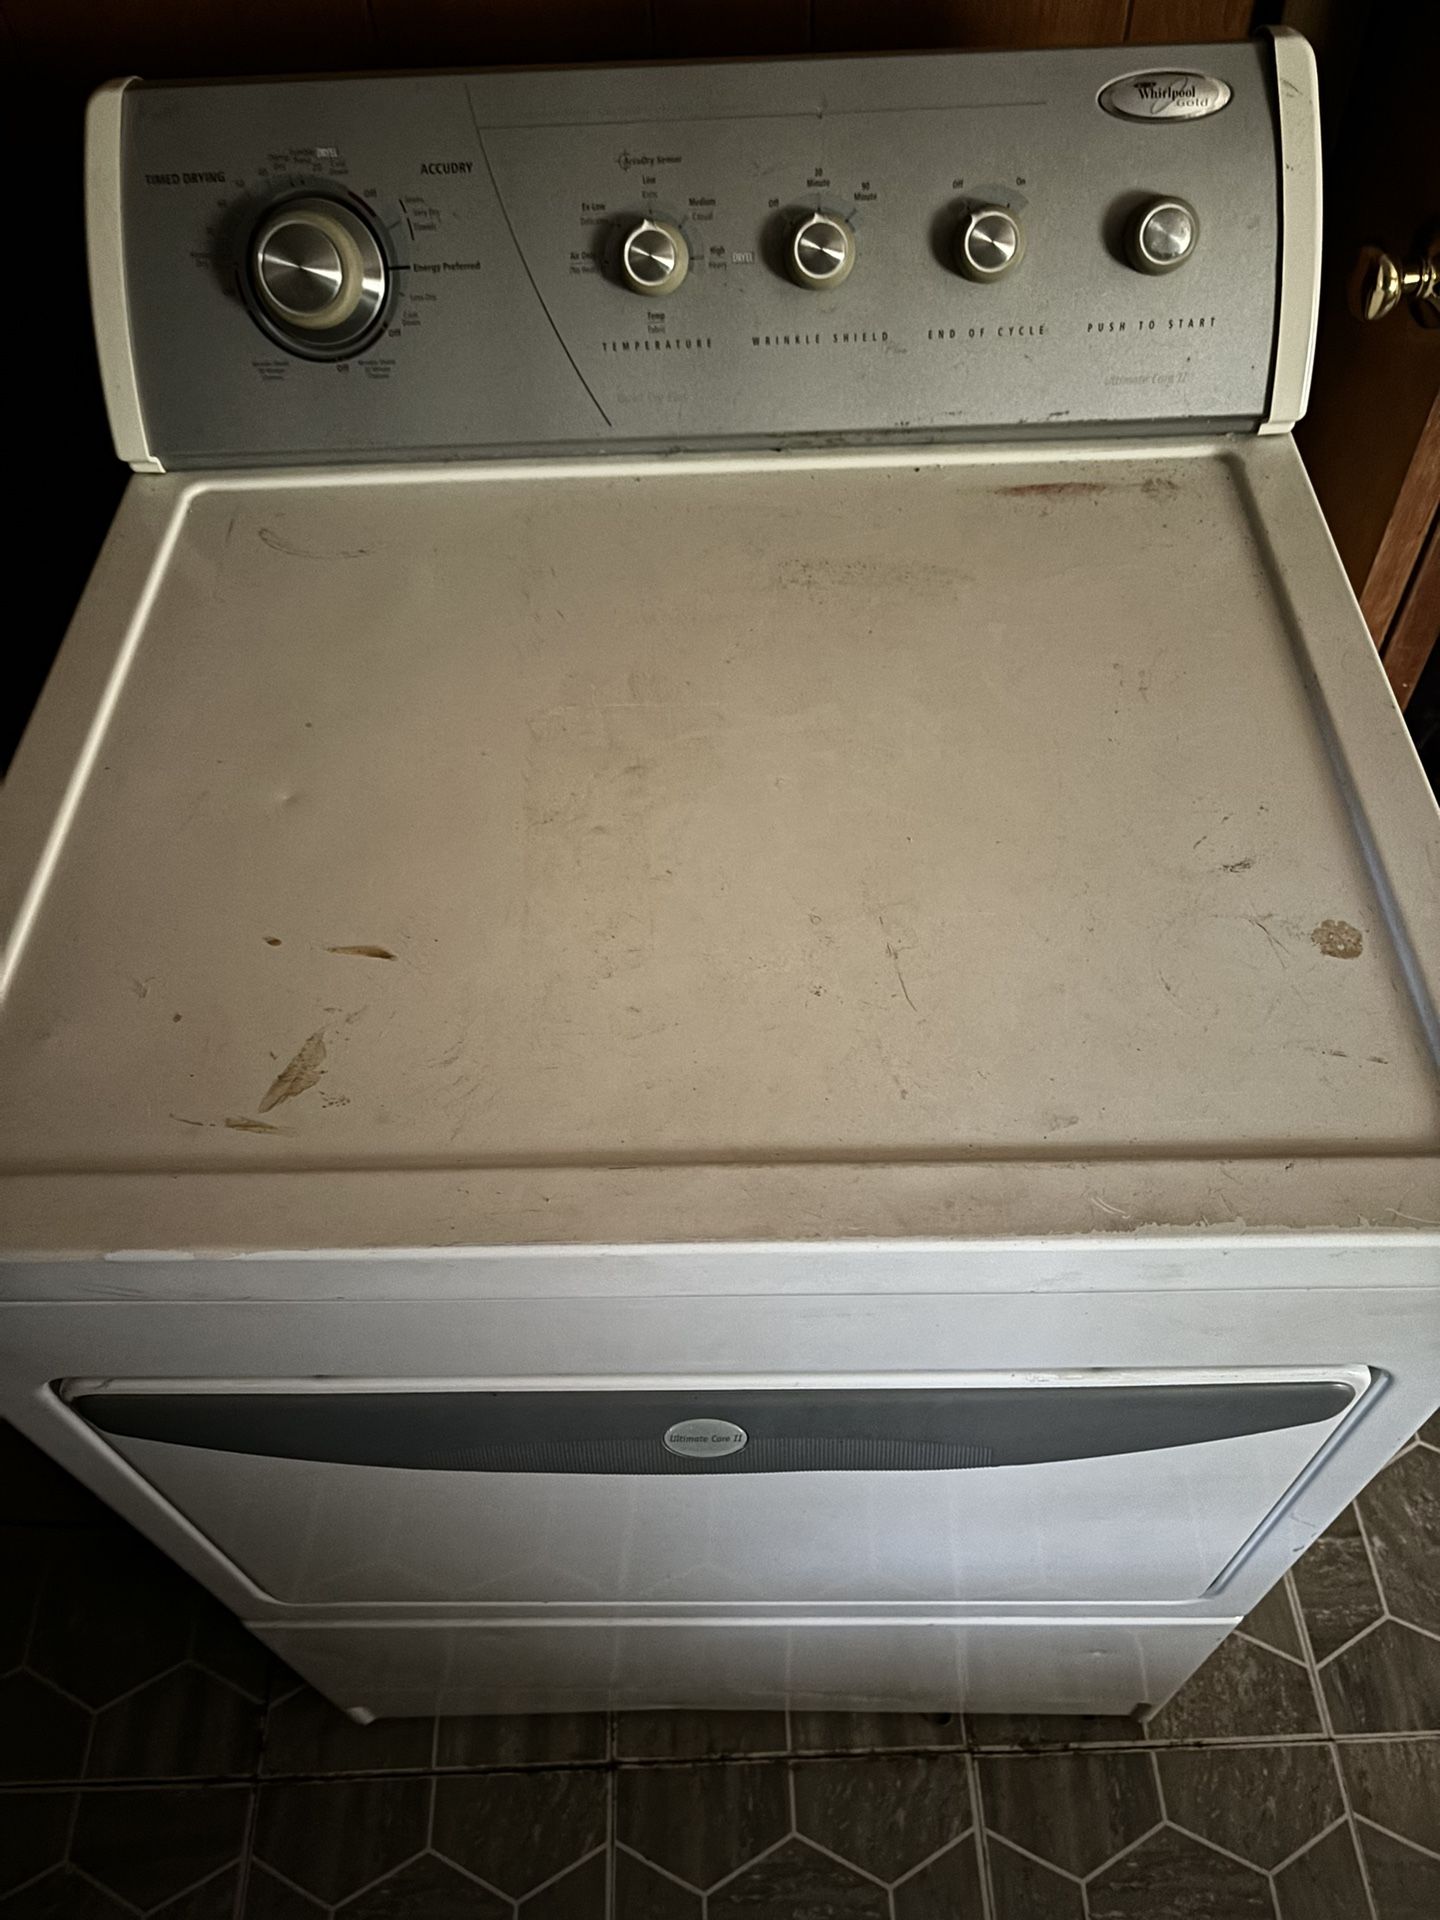 Whirlpool Gold Excellent Condition No Problems